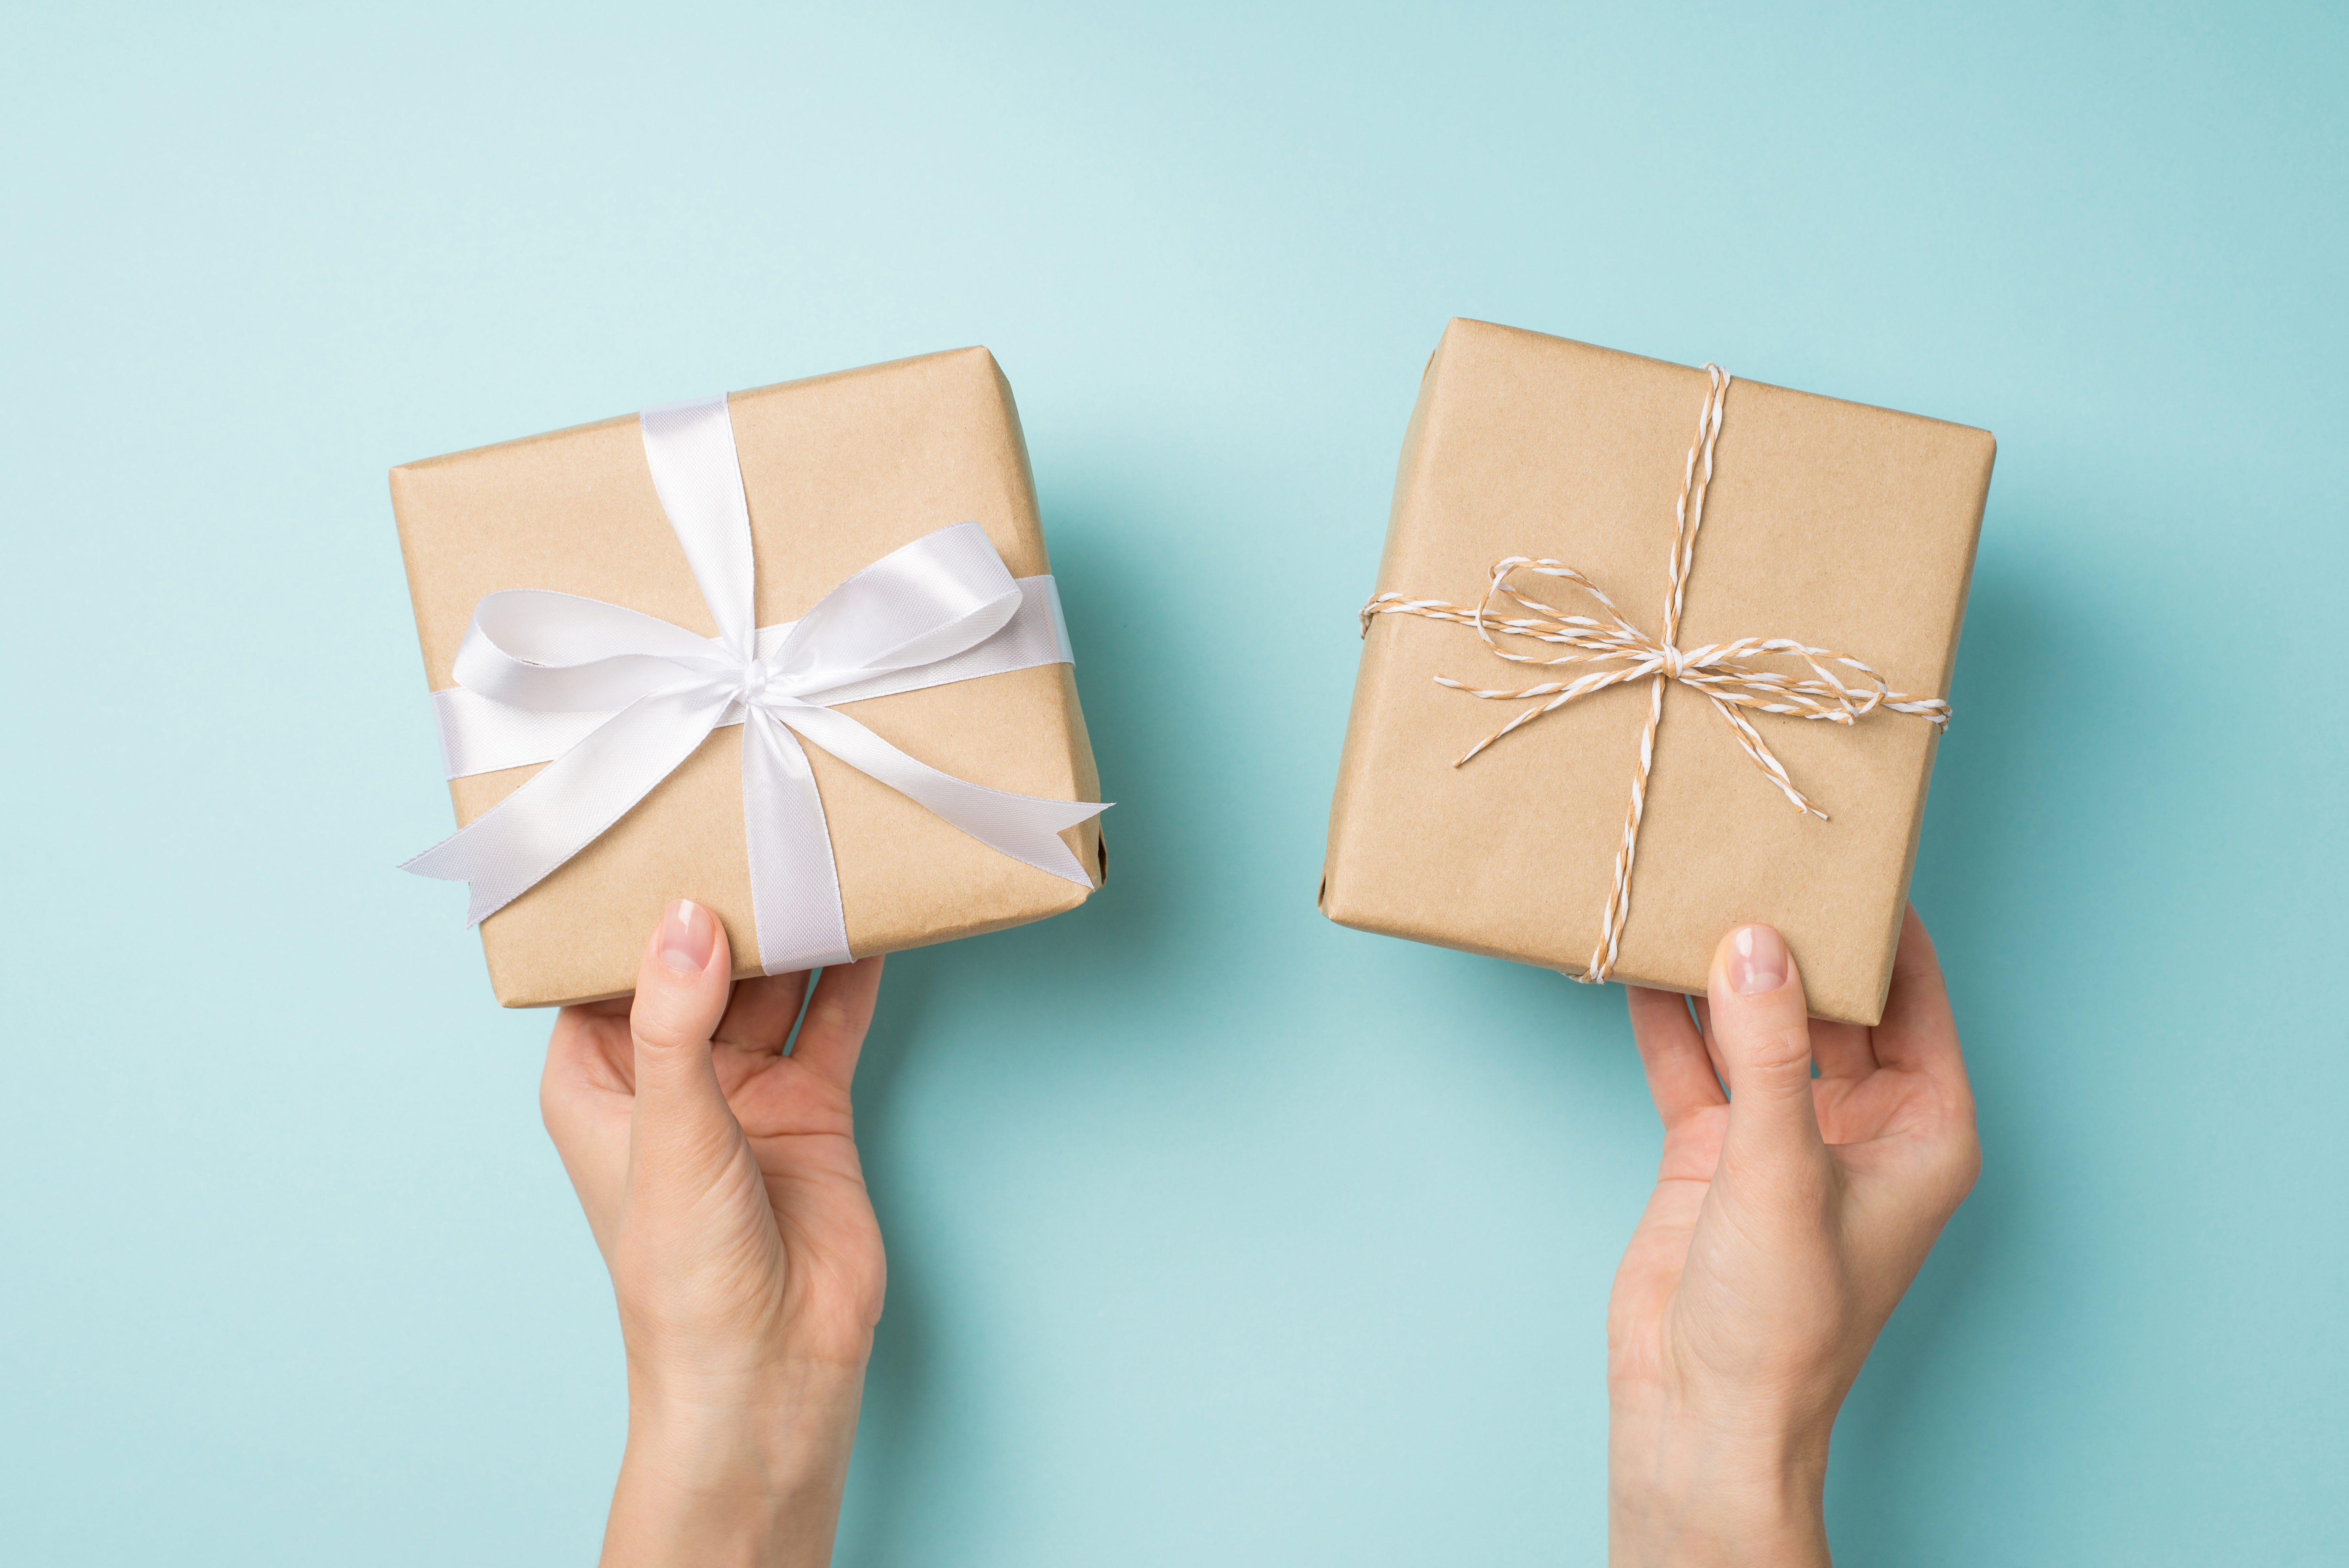 A person holding two gift boxes| Source: Shutterstock